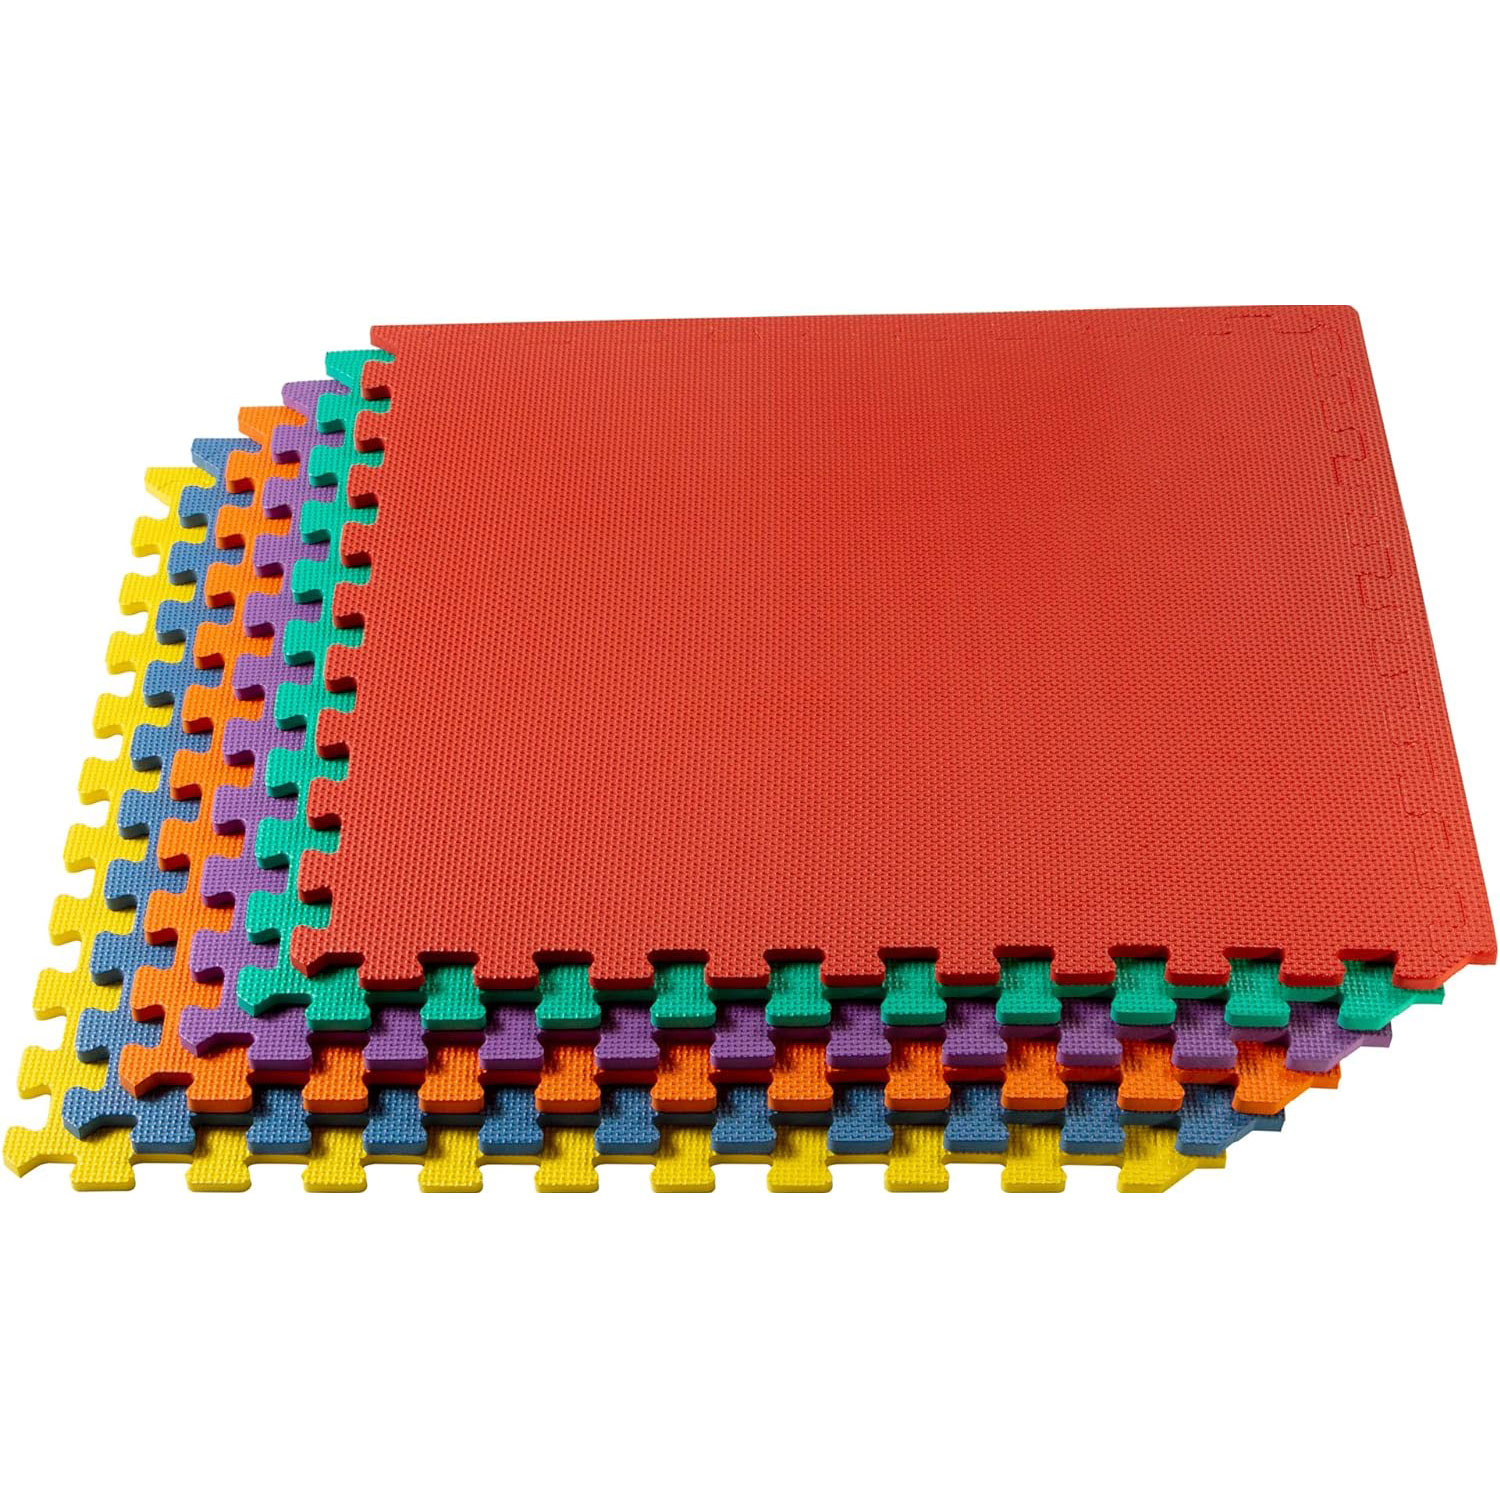 3/8 Inch Thick Multipurpose Exercise Floor Mat With EVA Foam Interlocking Tiles Anti-fatigue For Home Or Gym 24 in x 24 in By PAIDU